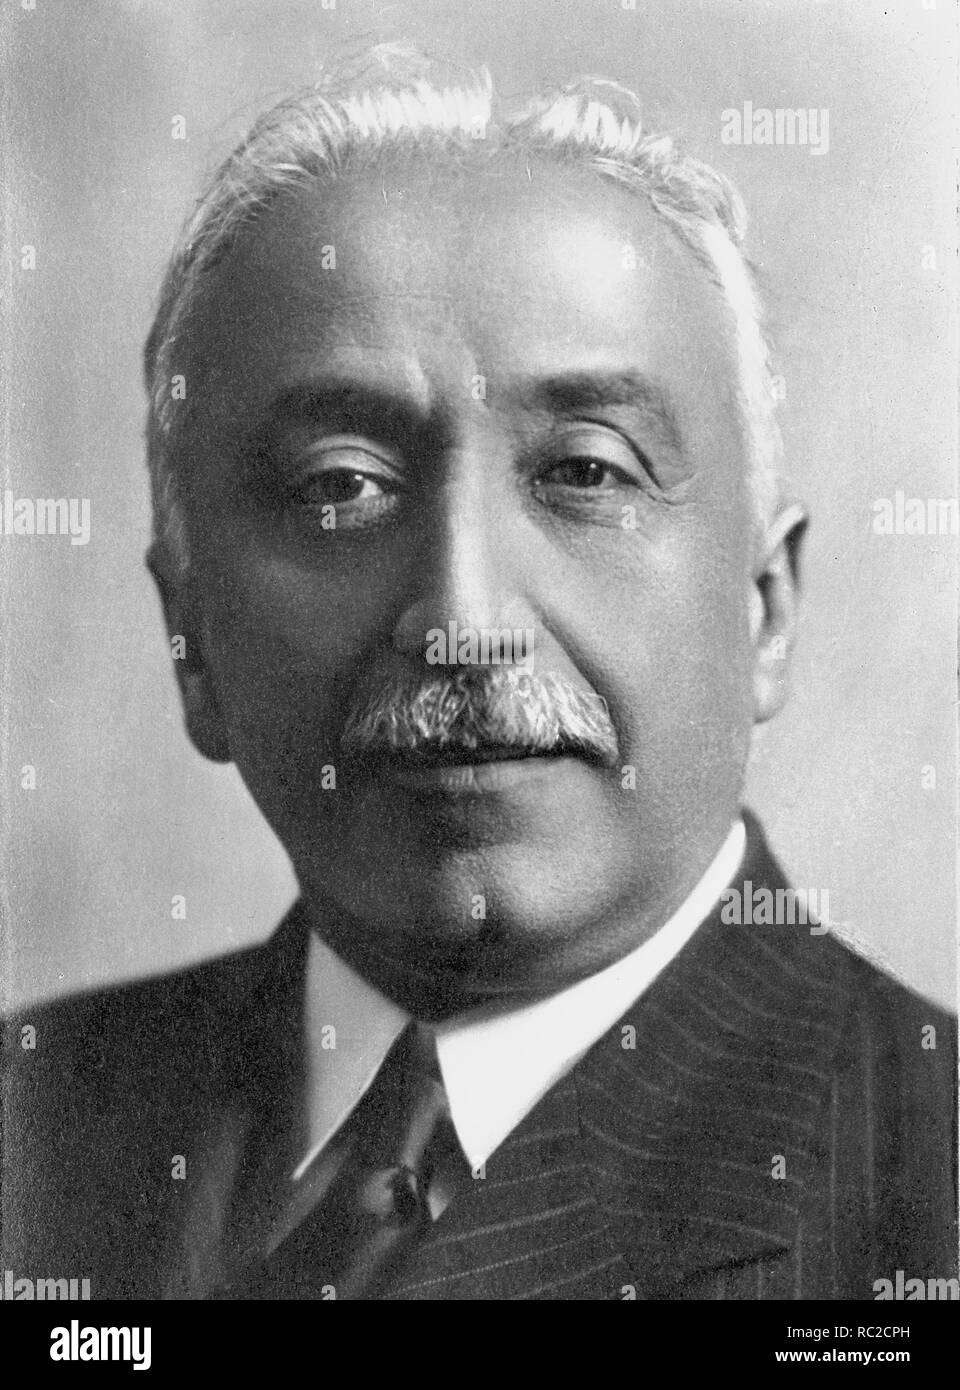 Niceto Alcalá-Zamora y Torres (1877 – 1949) Spanish politician who served, briefly, as the first prime minister of the Second Spanish Republic, and from 1931 to 1936 as its president. Stock Photo